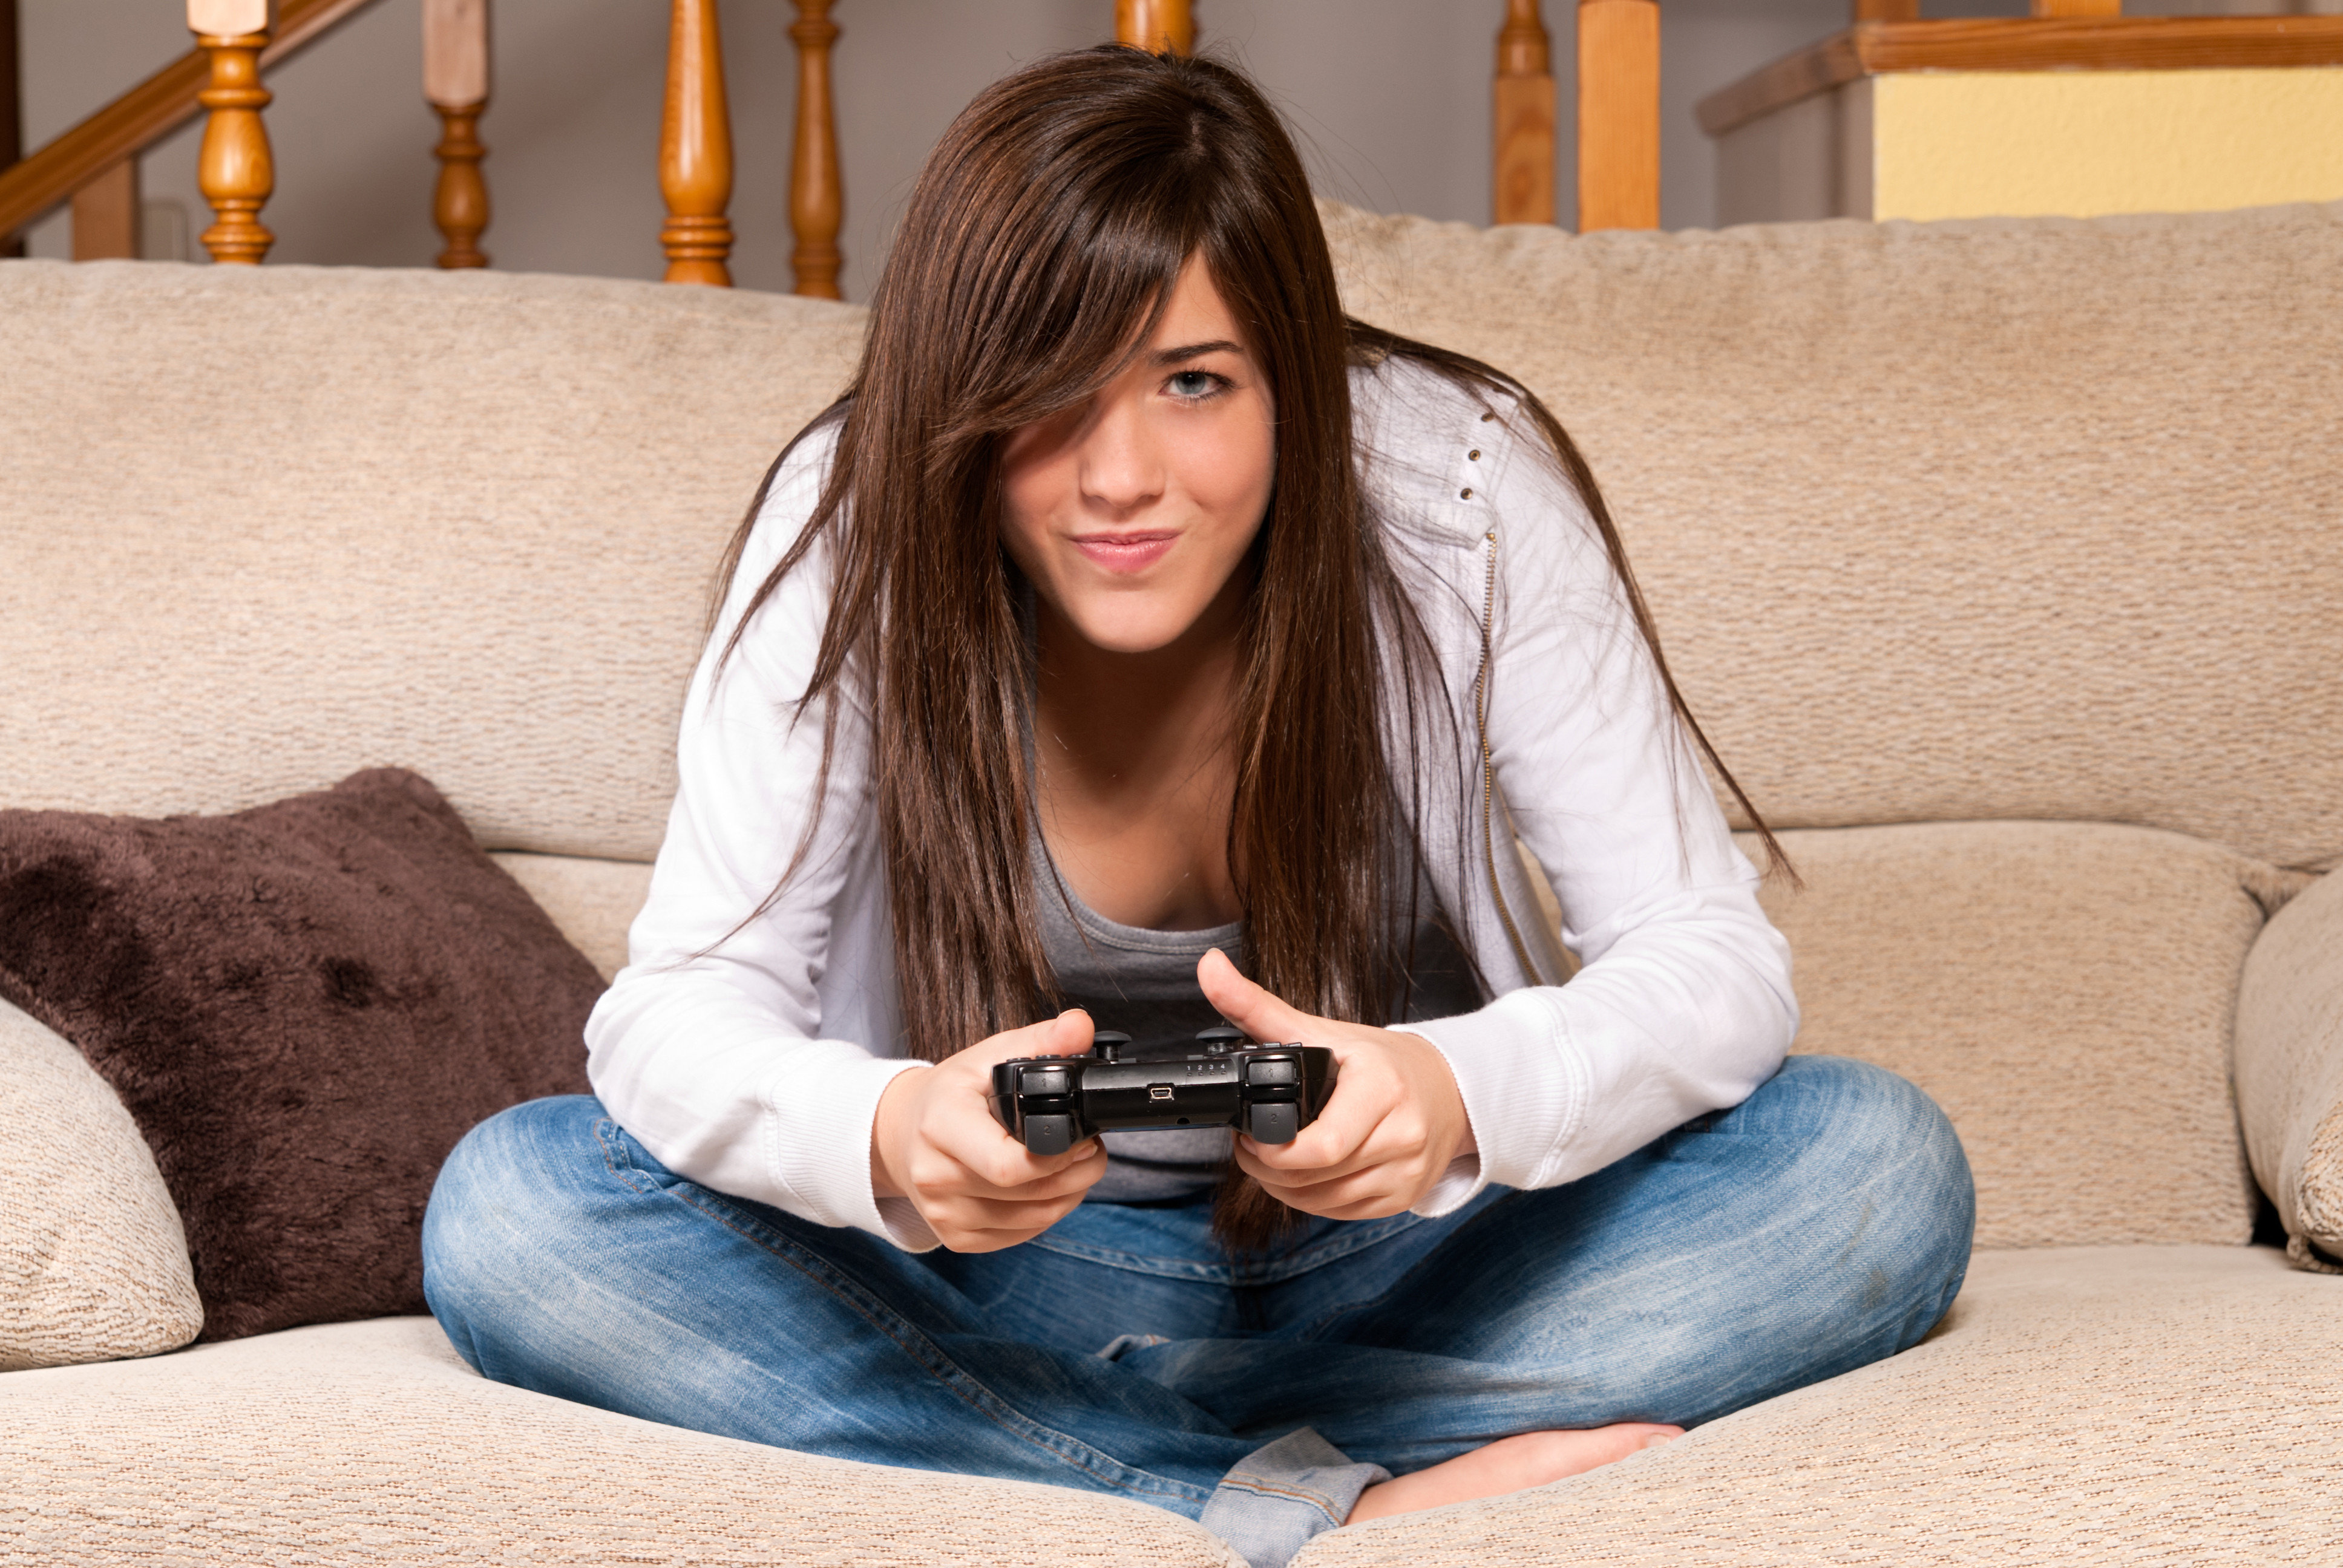 Sexual Harassment In Online Gaming Is All Too Real HuffPost